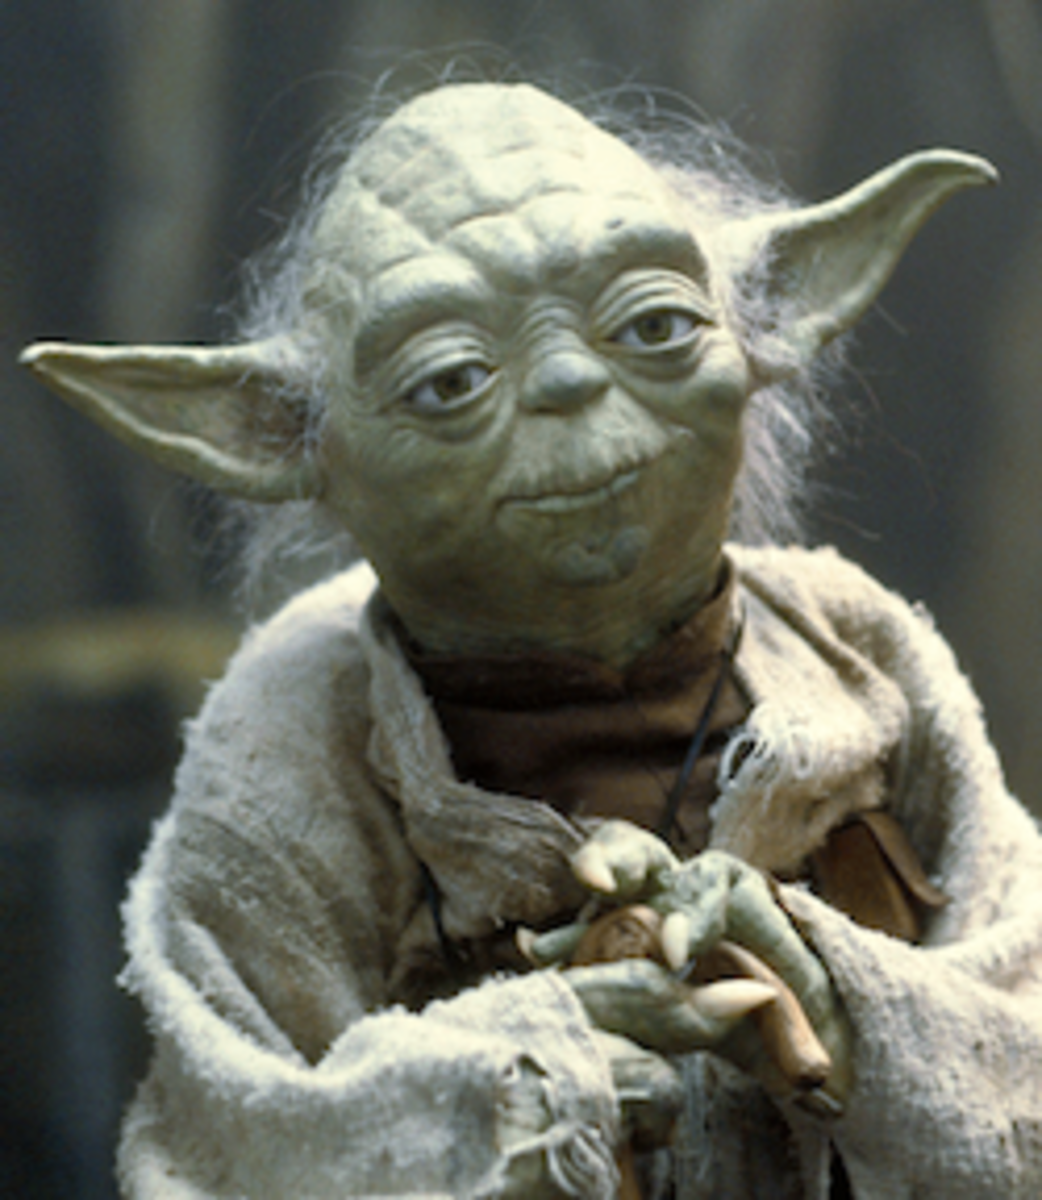 Puppet character Yoda, as depicted in The Empire Strikes Back, voiced and acted by Frank Oz.